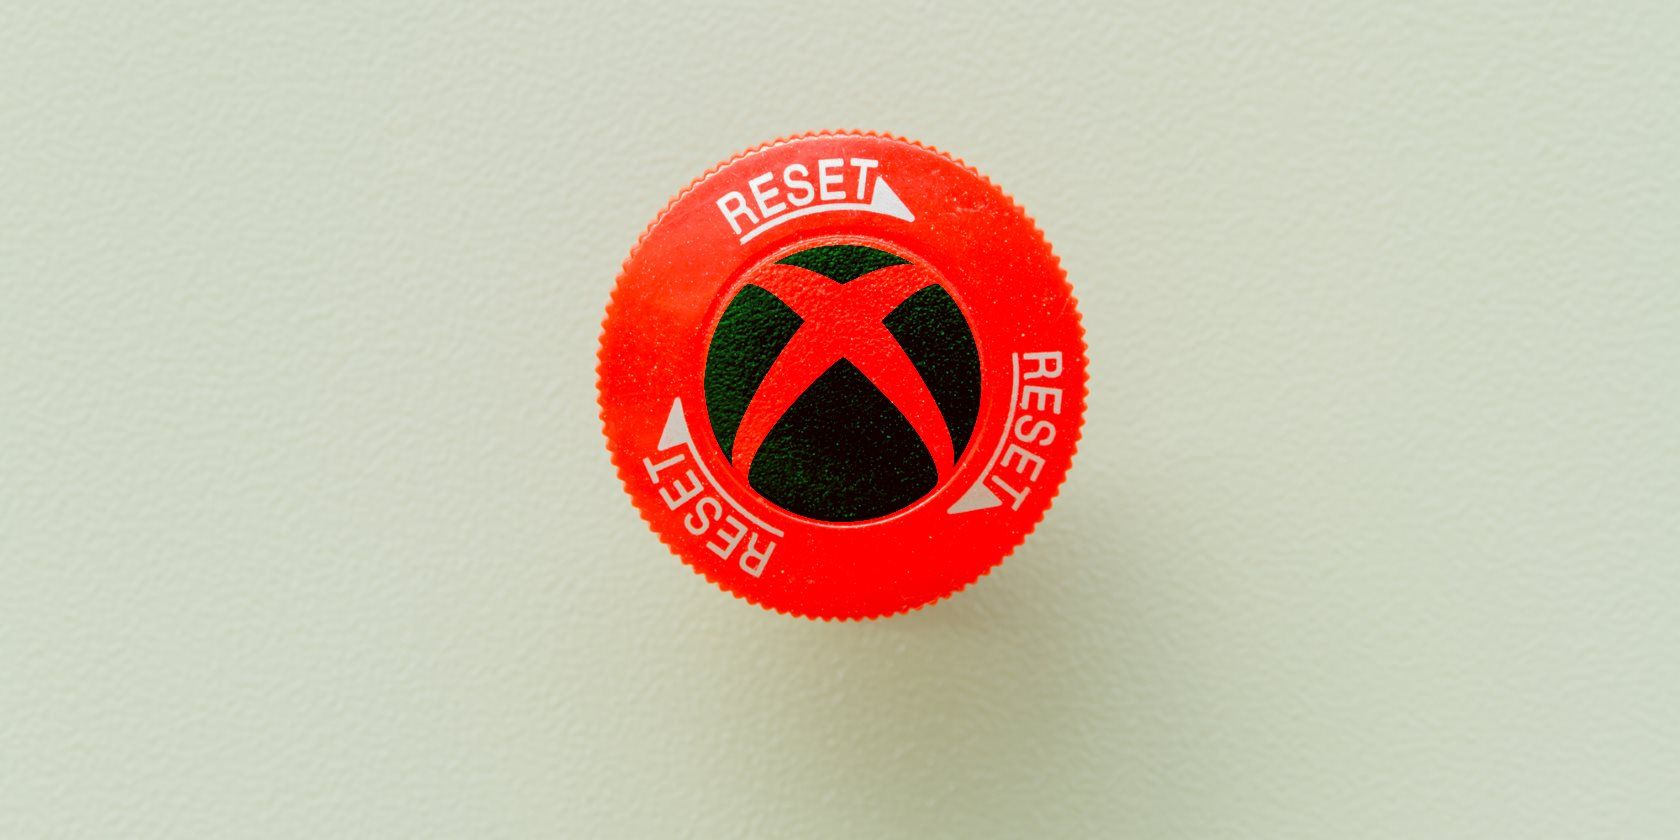 Xbox logo on red 